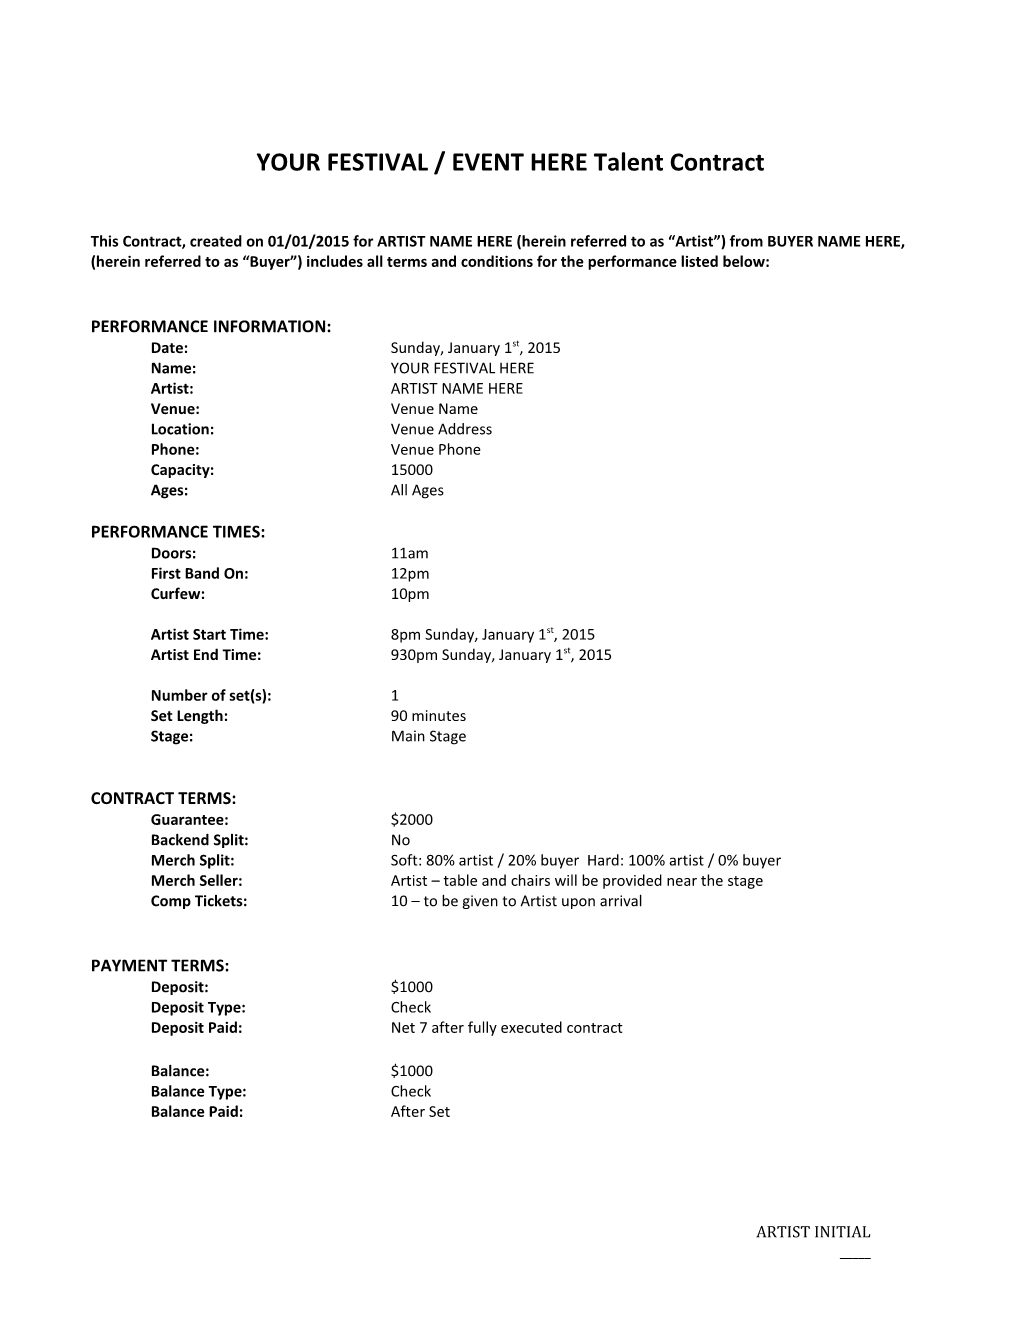 YOUR FESTIVAL / EVENT HERE Talent Contract